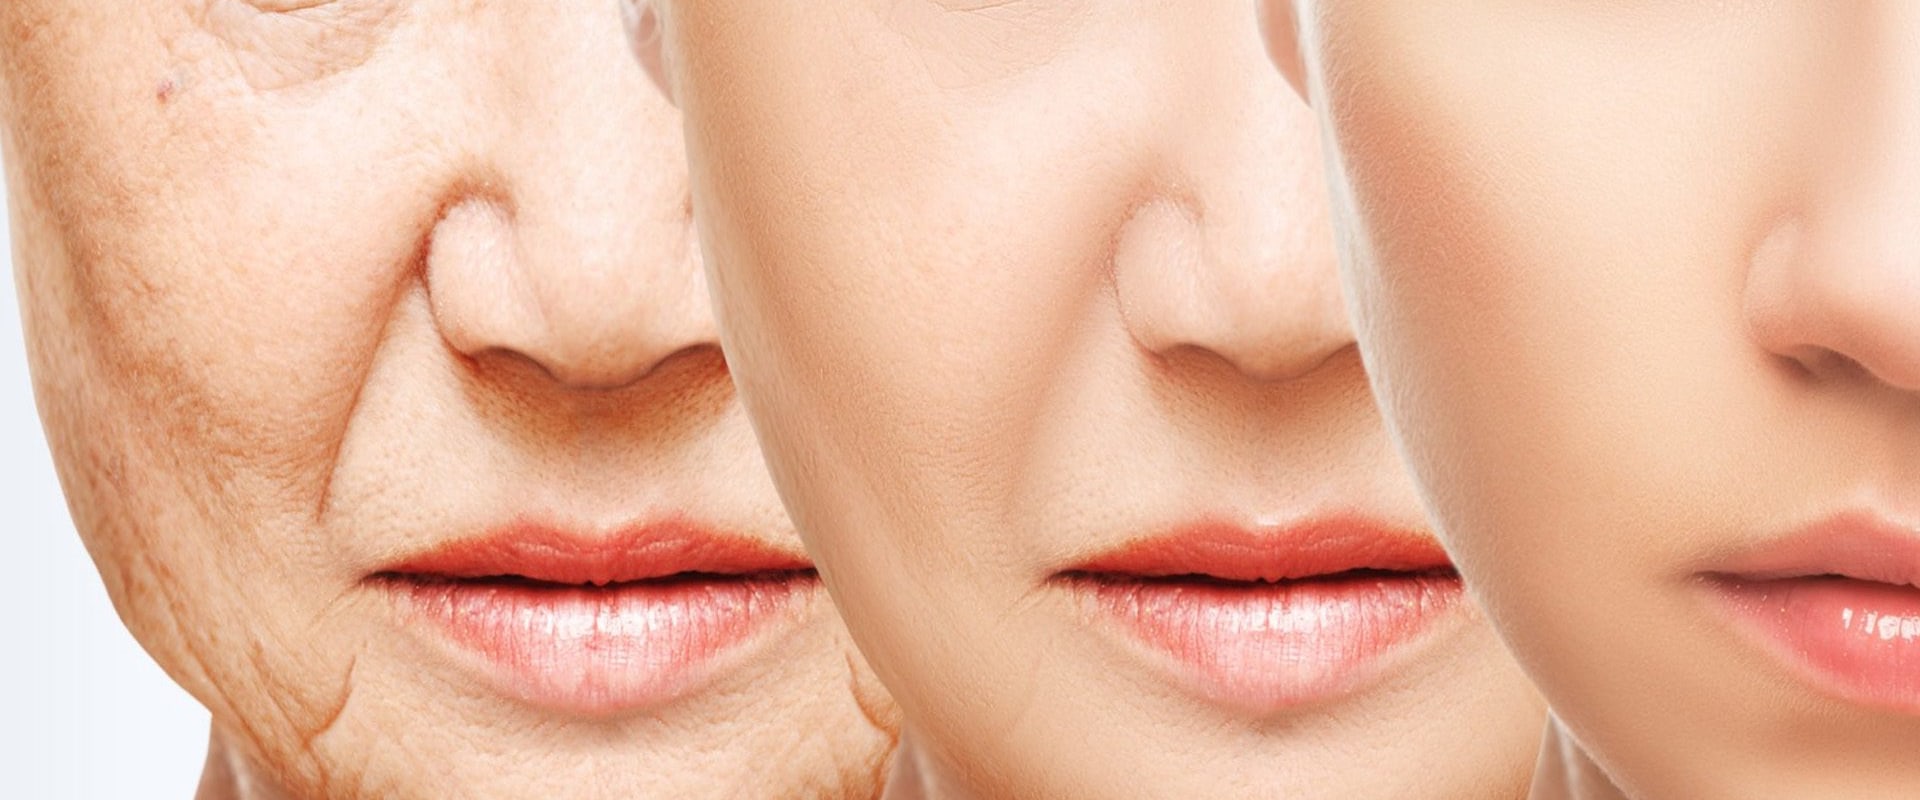 What are the best beauty and health tips for reducing wrinkles?